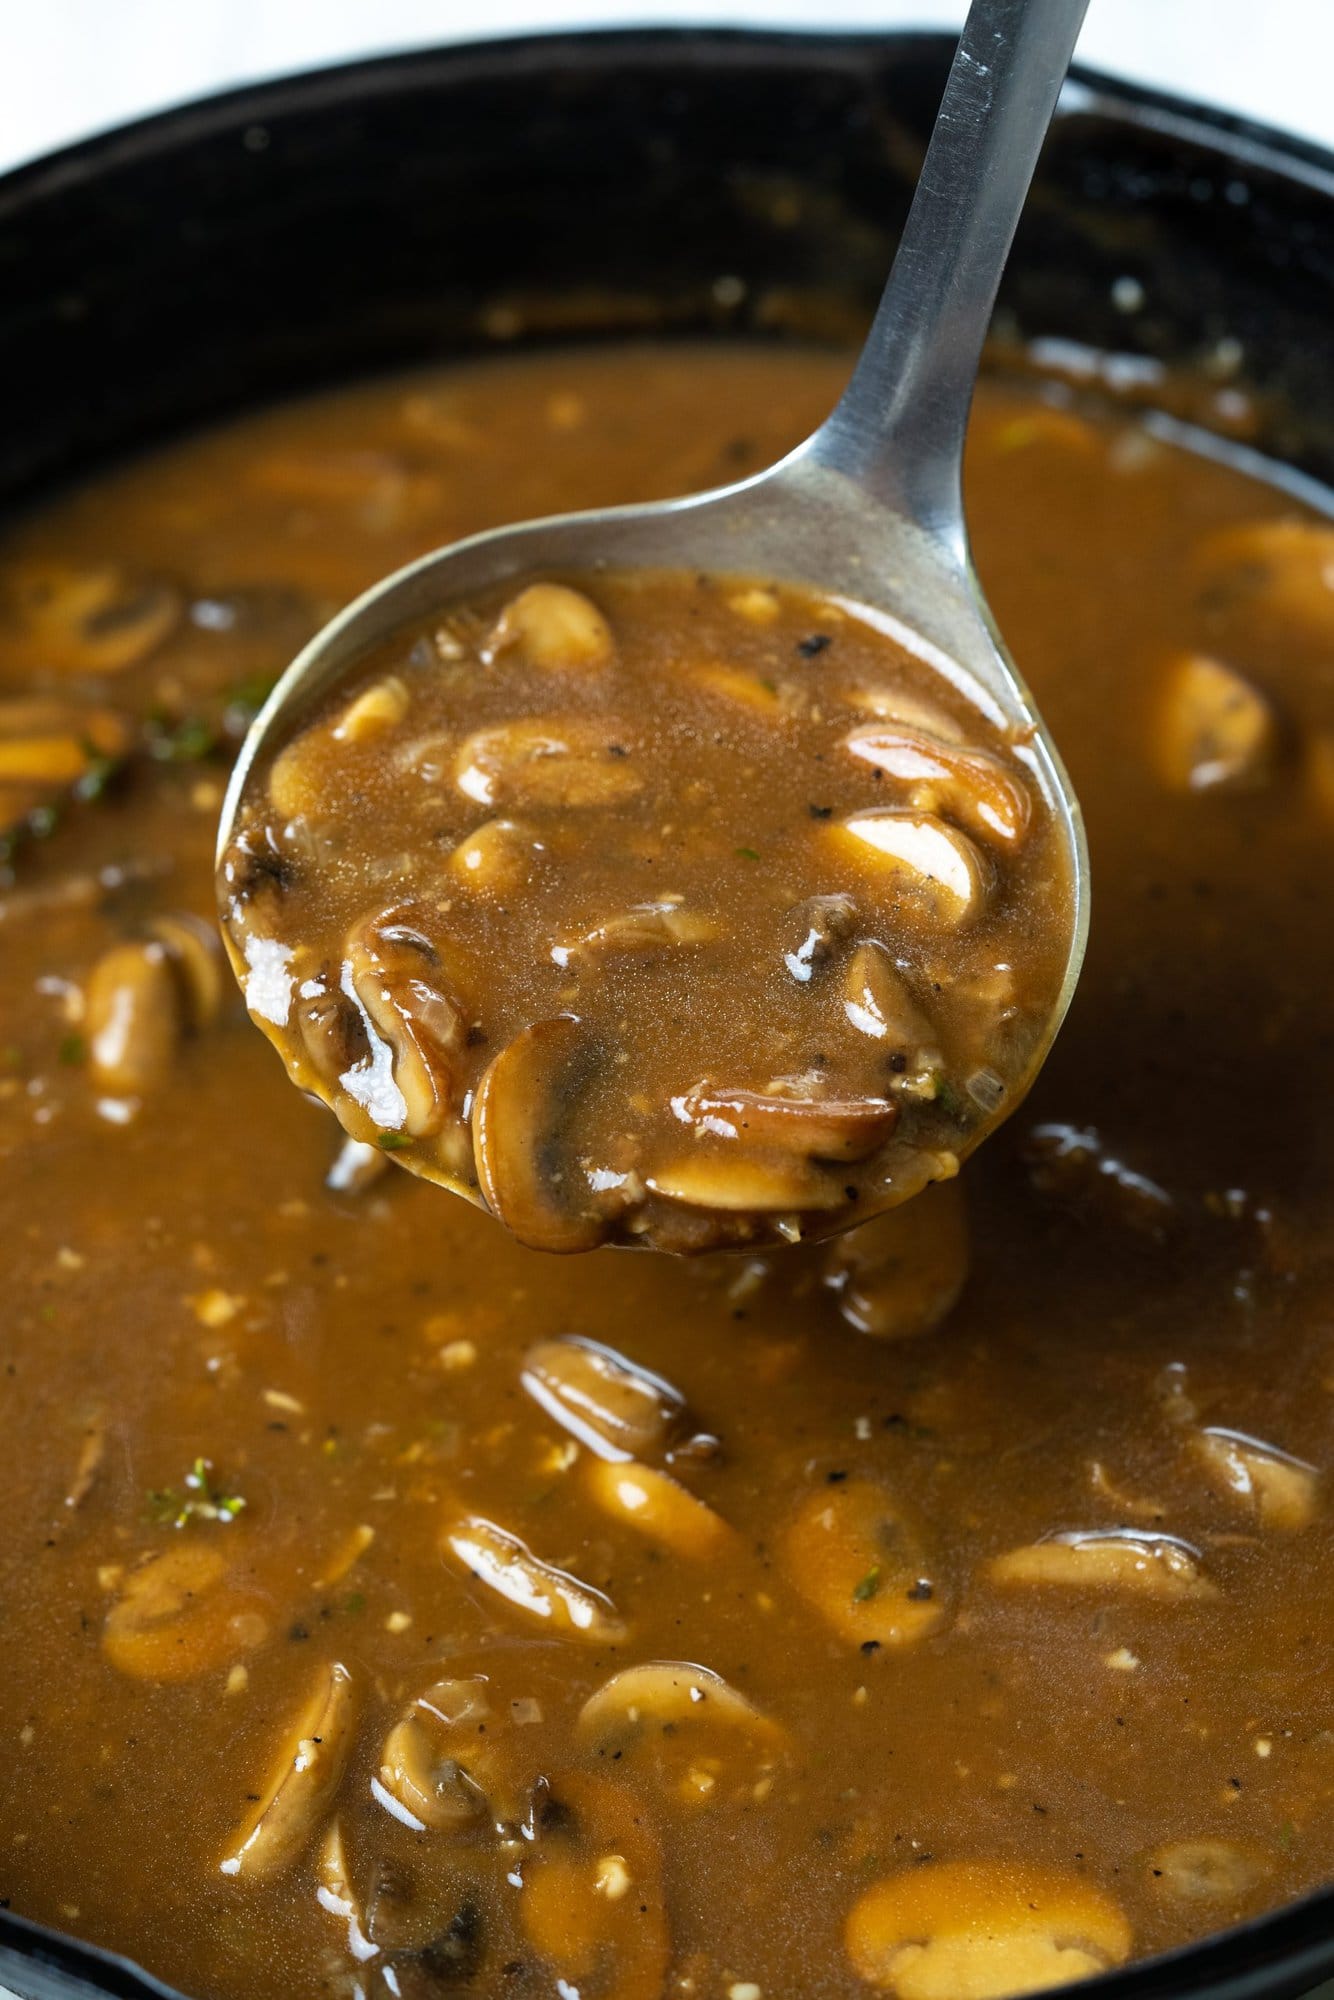 This mushroom gravy is super delicious, easy to make, and has unmistakable umami from a secret ingredient. You can serve it any steak, mashed potato, grilled veggies, or even any bread.